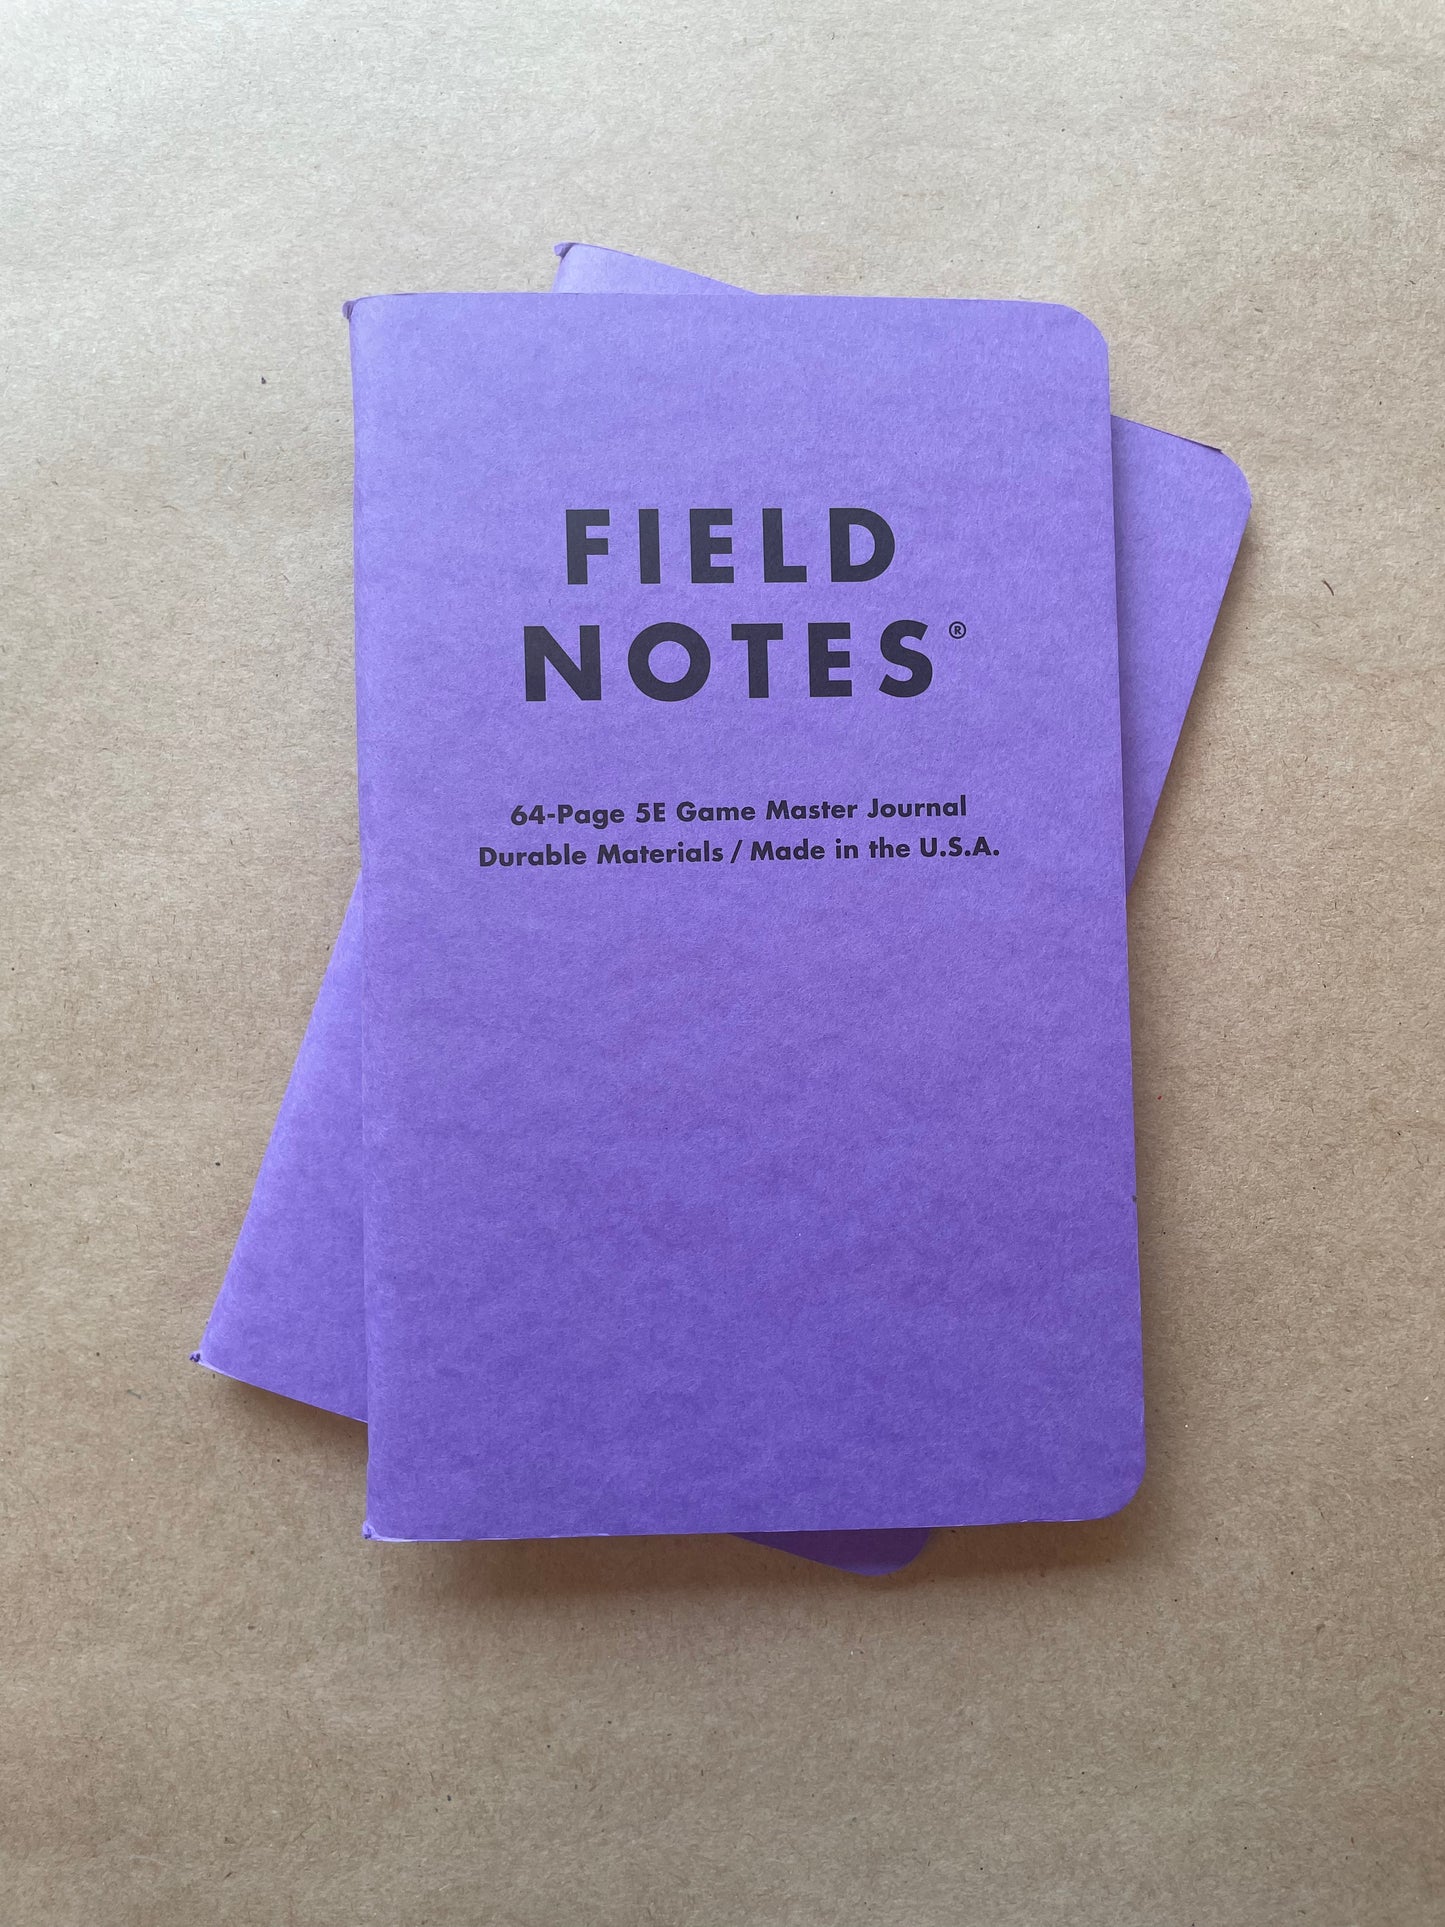 Field Notes 5E Gaming Journal - Game Master 2-PACK